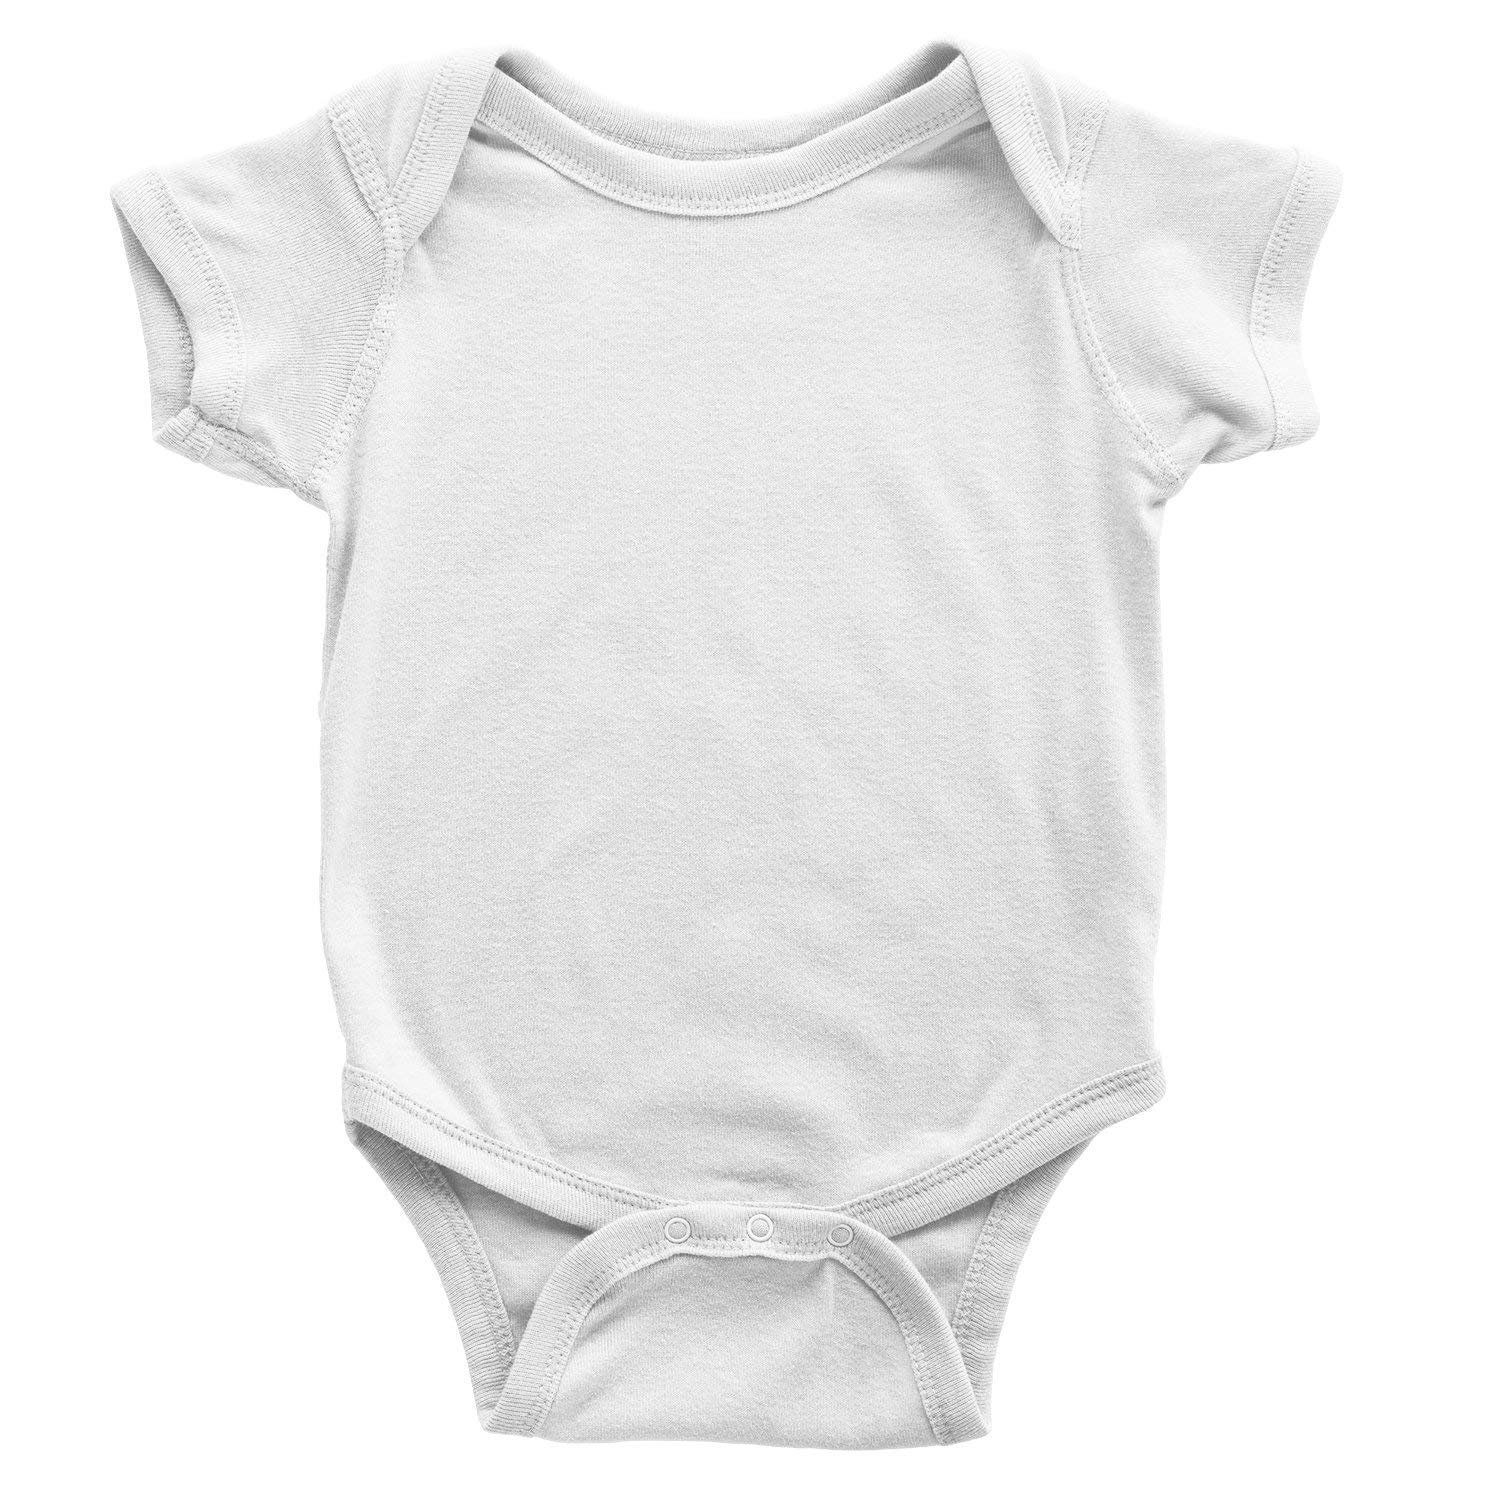 Primary image for Tulo & Garn Baby Bodysuit Screen Printed Soft 100% Cotton Snapsuit